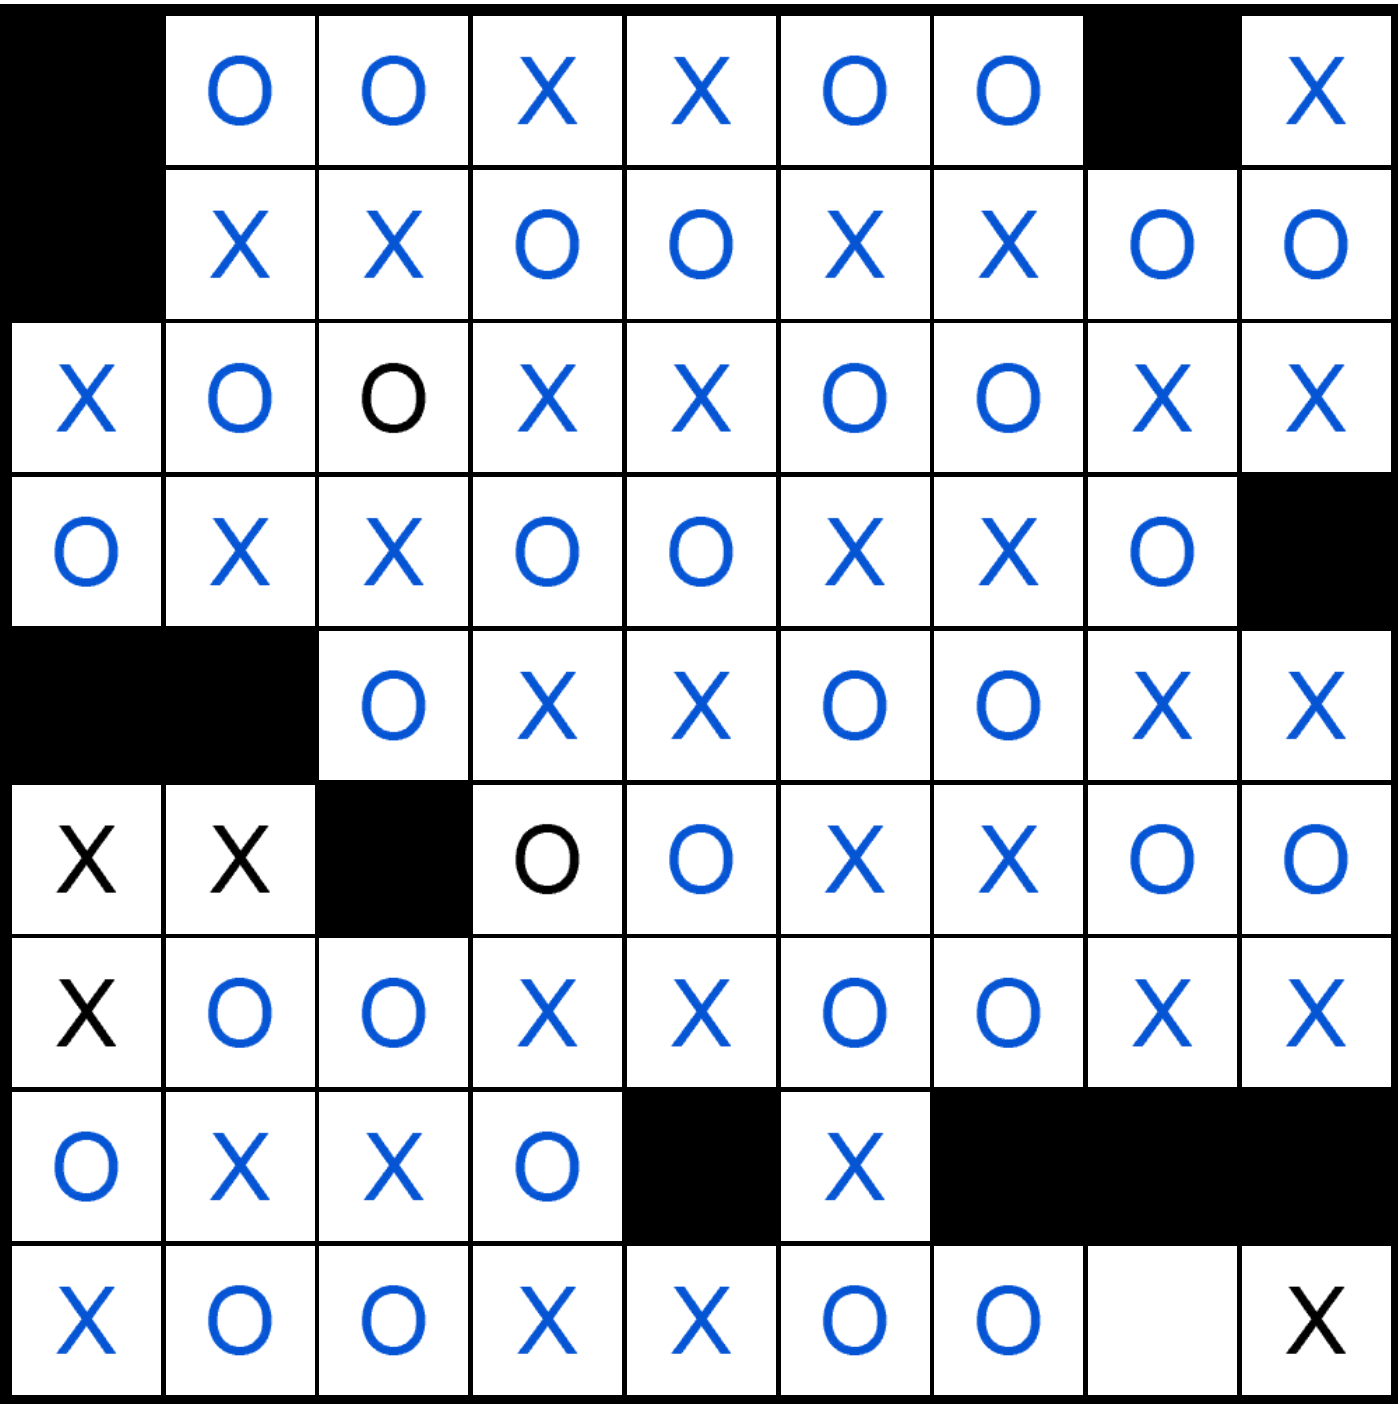 Puzzle Page Os and Xs August 13 2020 Answers PuzzlePageAnswers net